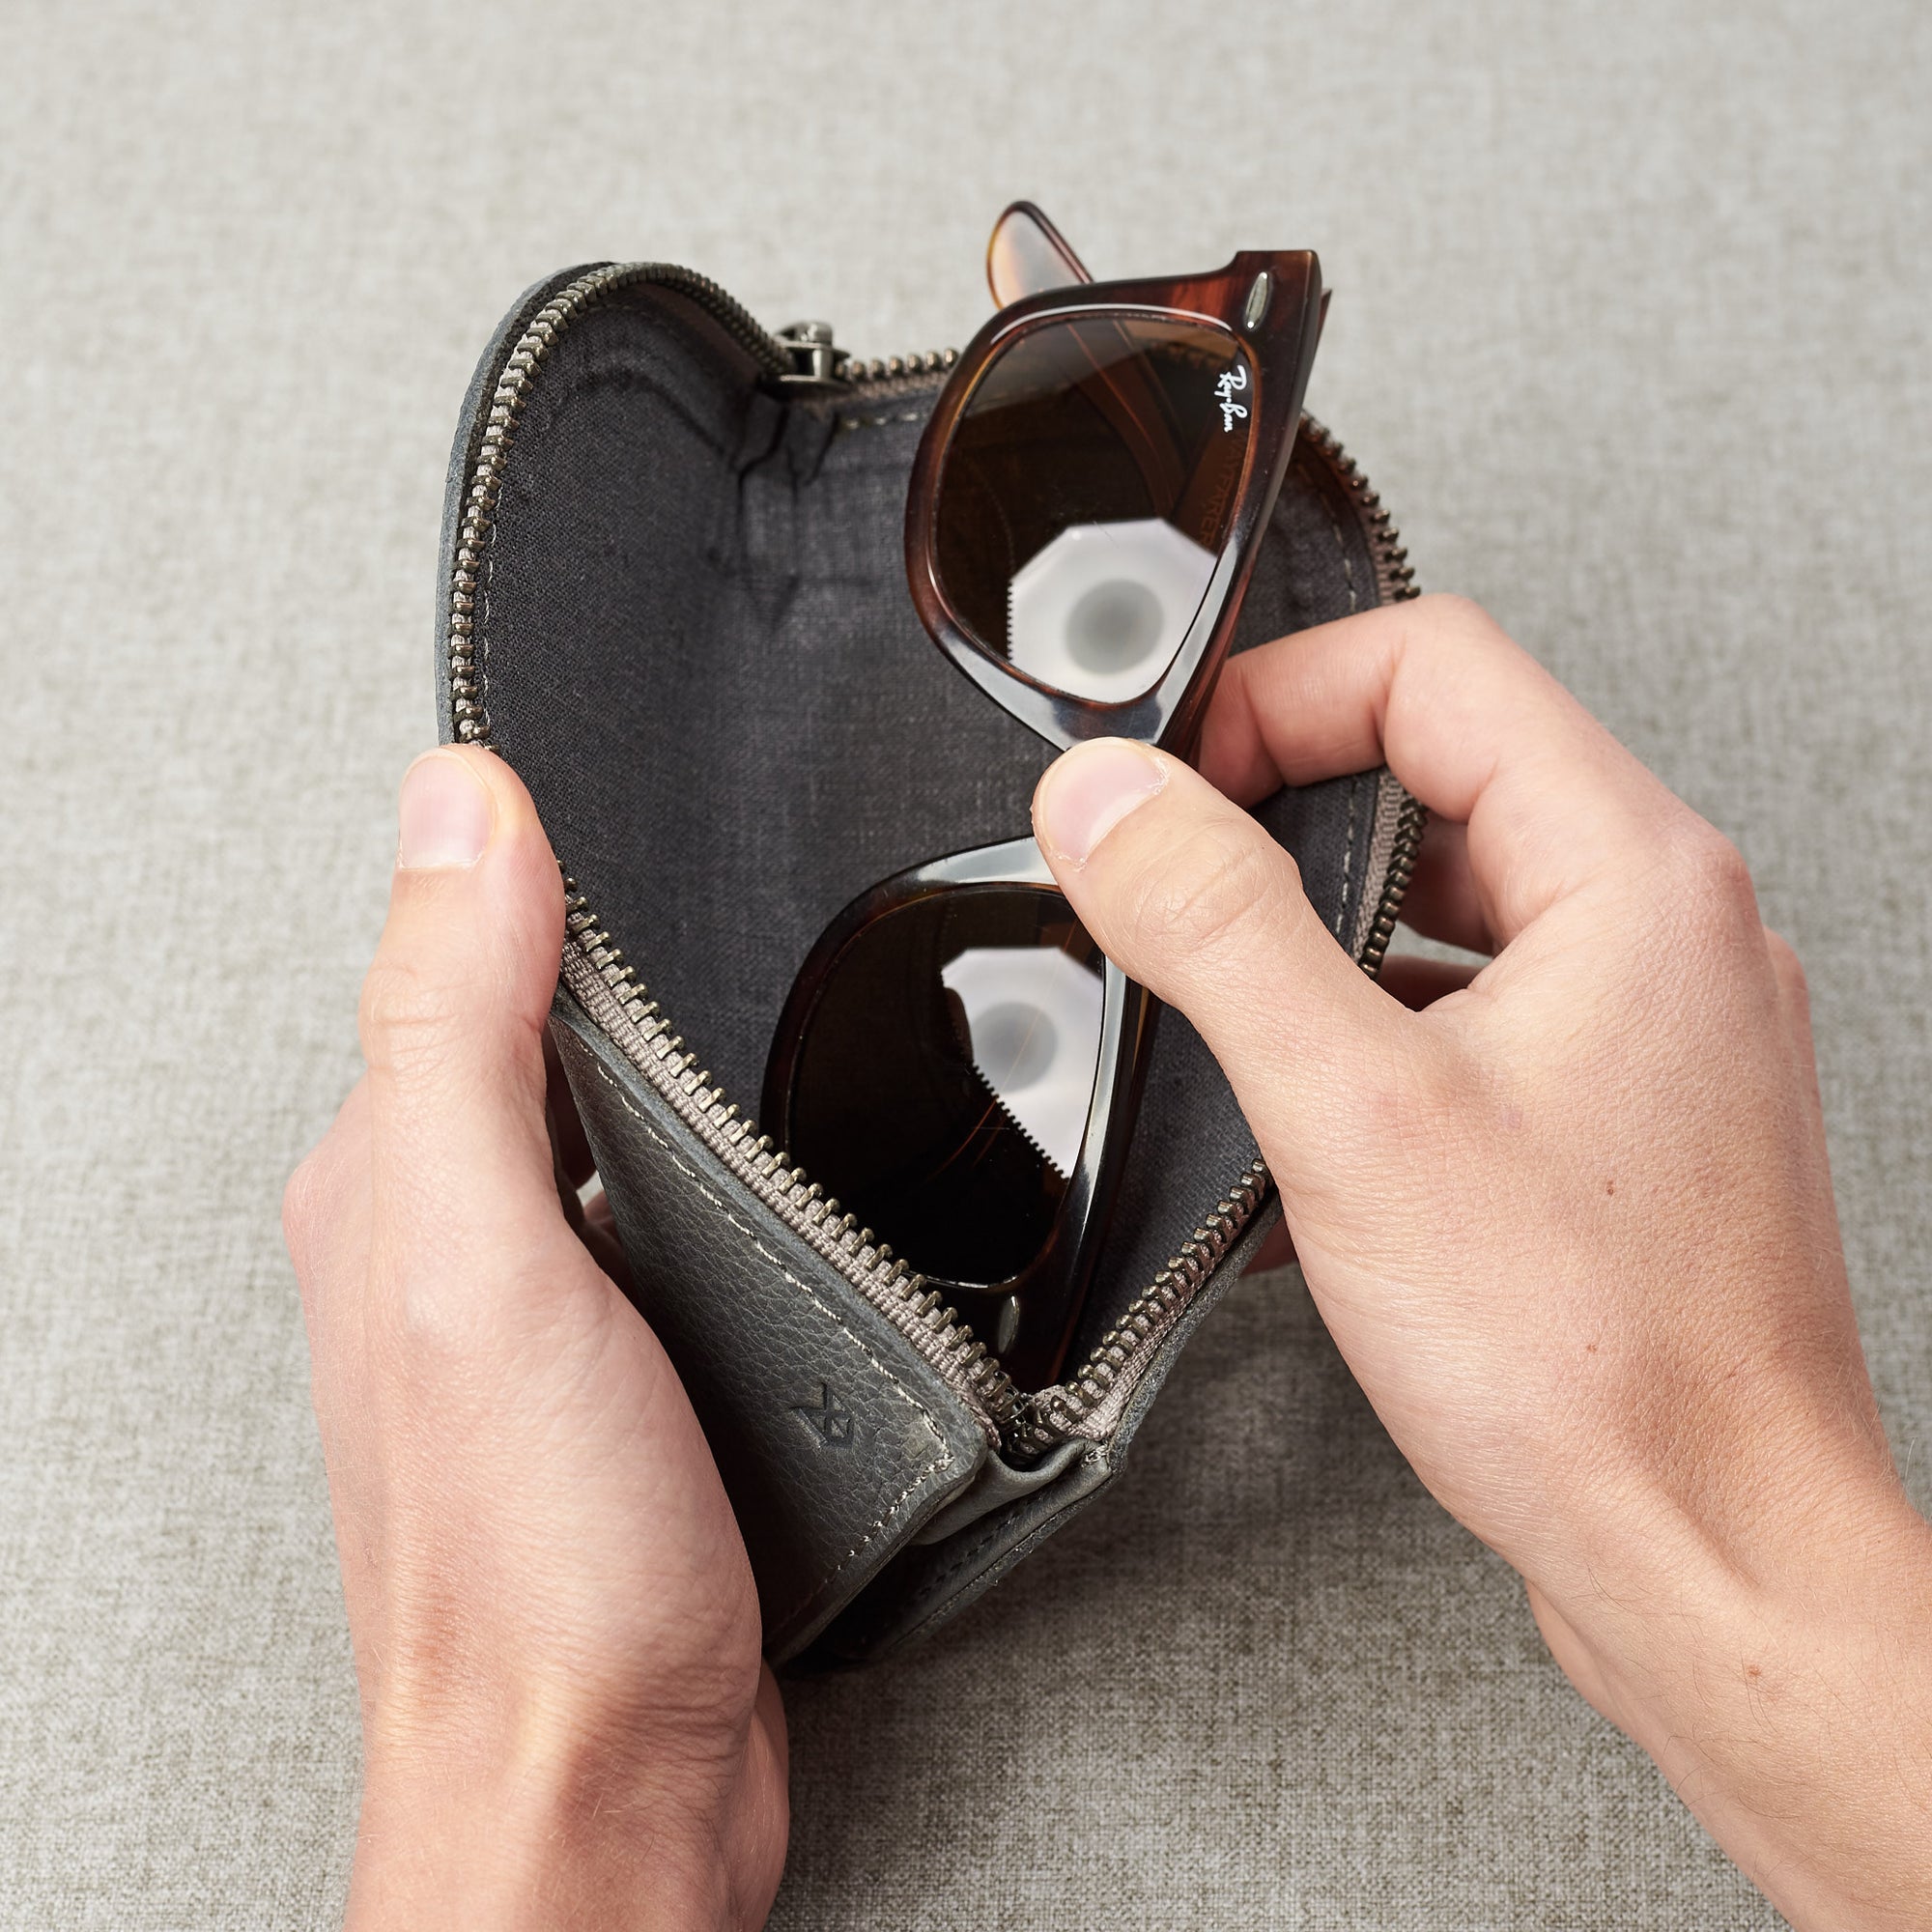 Style. Gifts for men. Grey leather Glasses case, sunglasses case, hand stitched leather sleeve for reading glasses